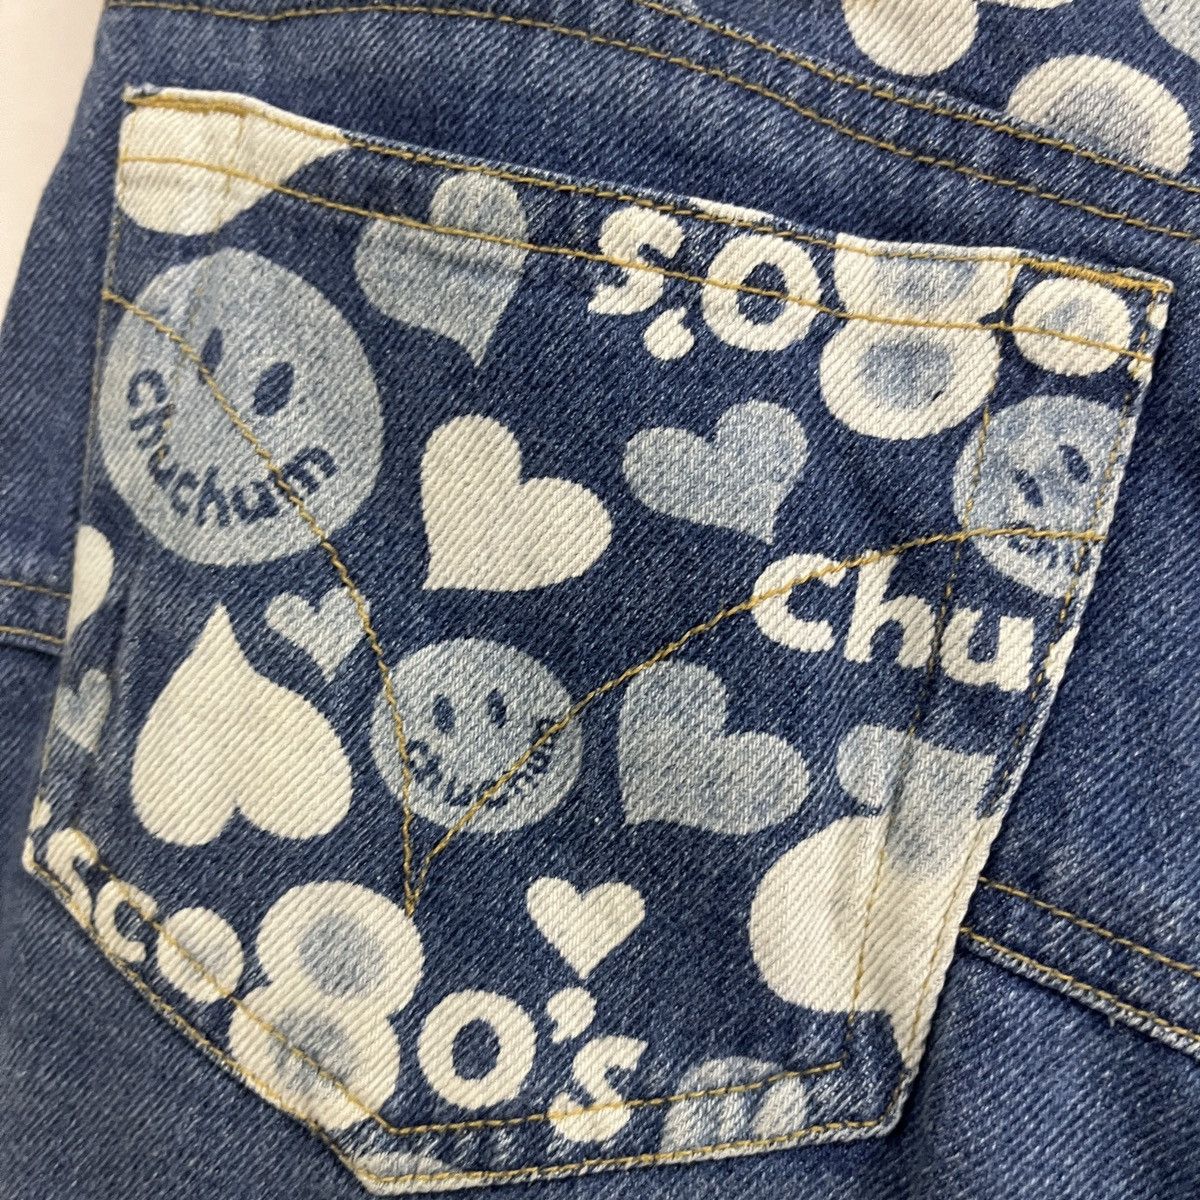 Vintage - Hysteric Flared Chuchum Full Printed Patches Denim Jeans - 14